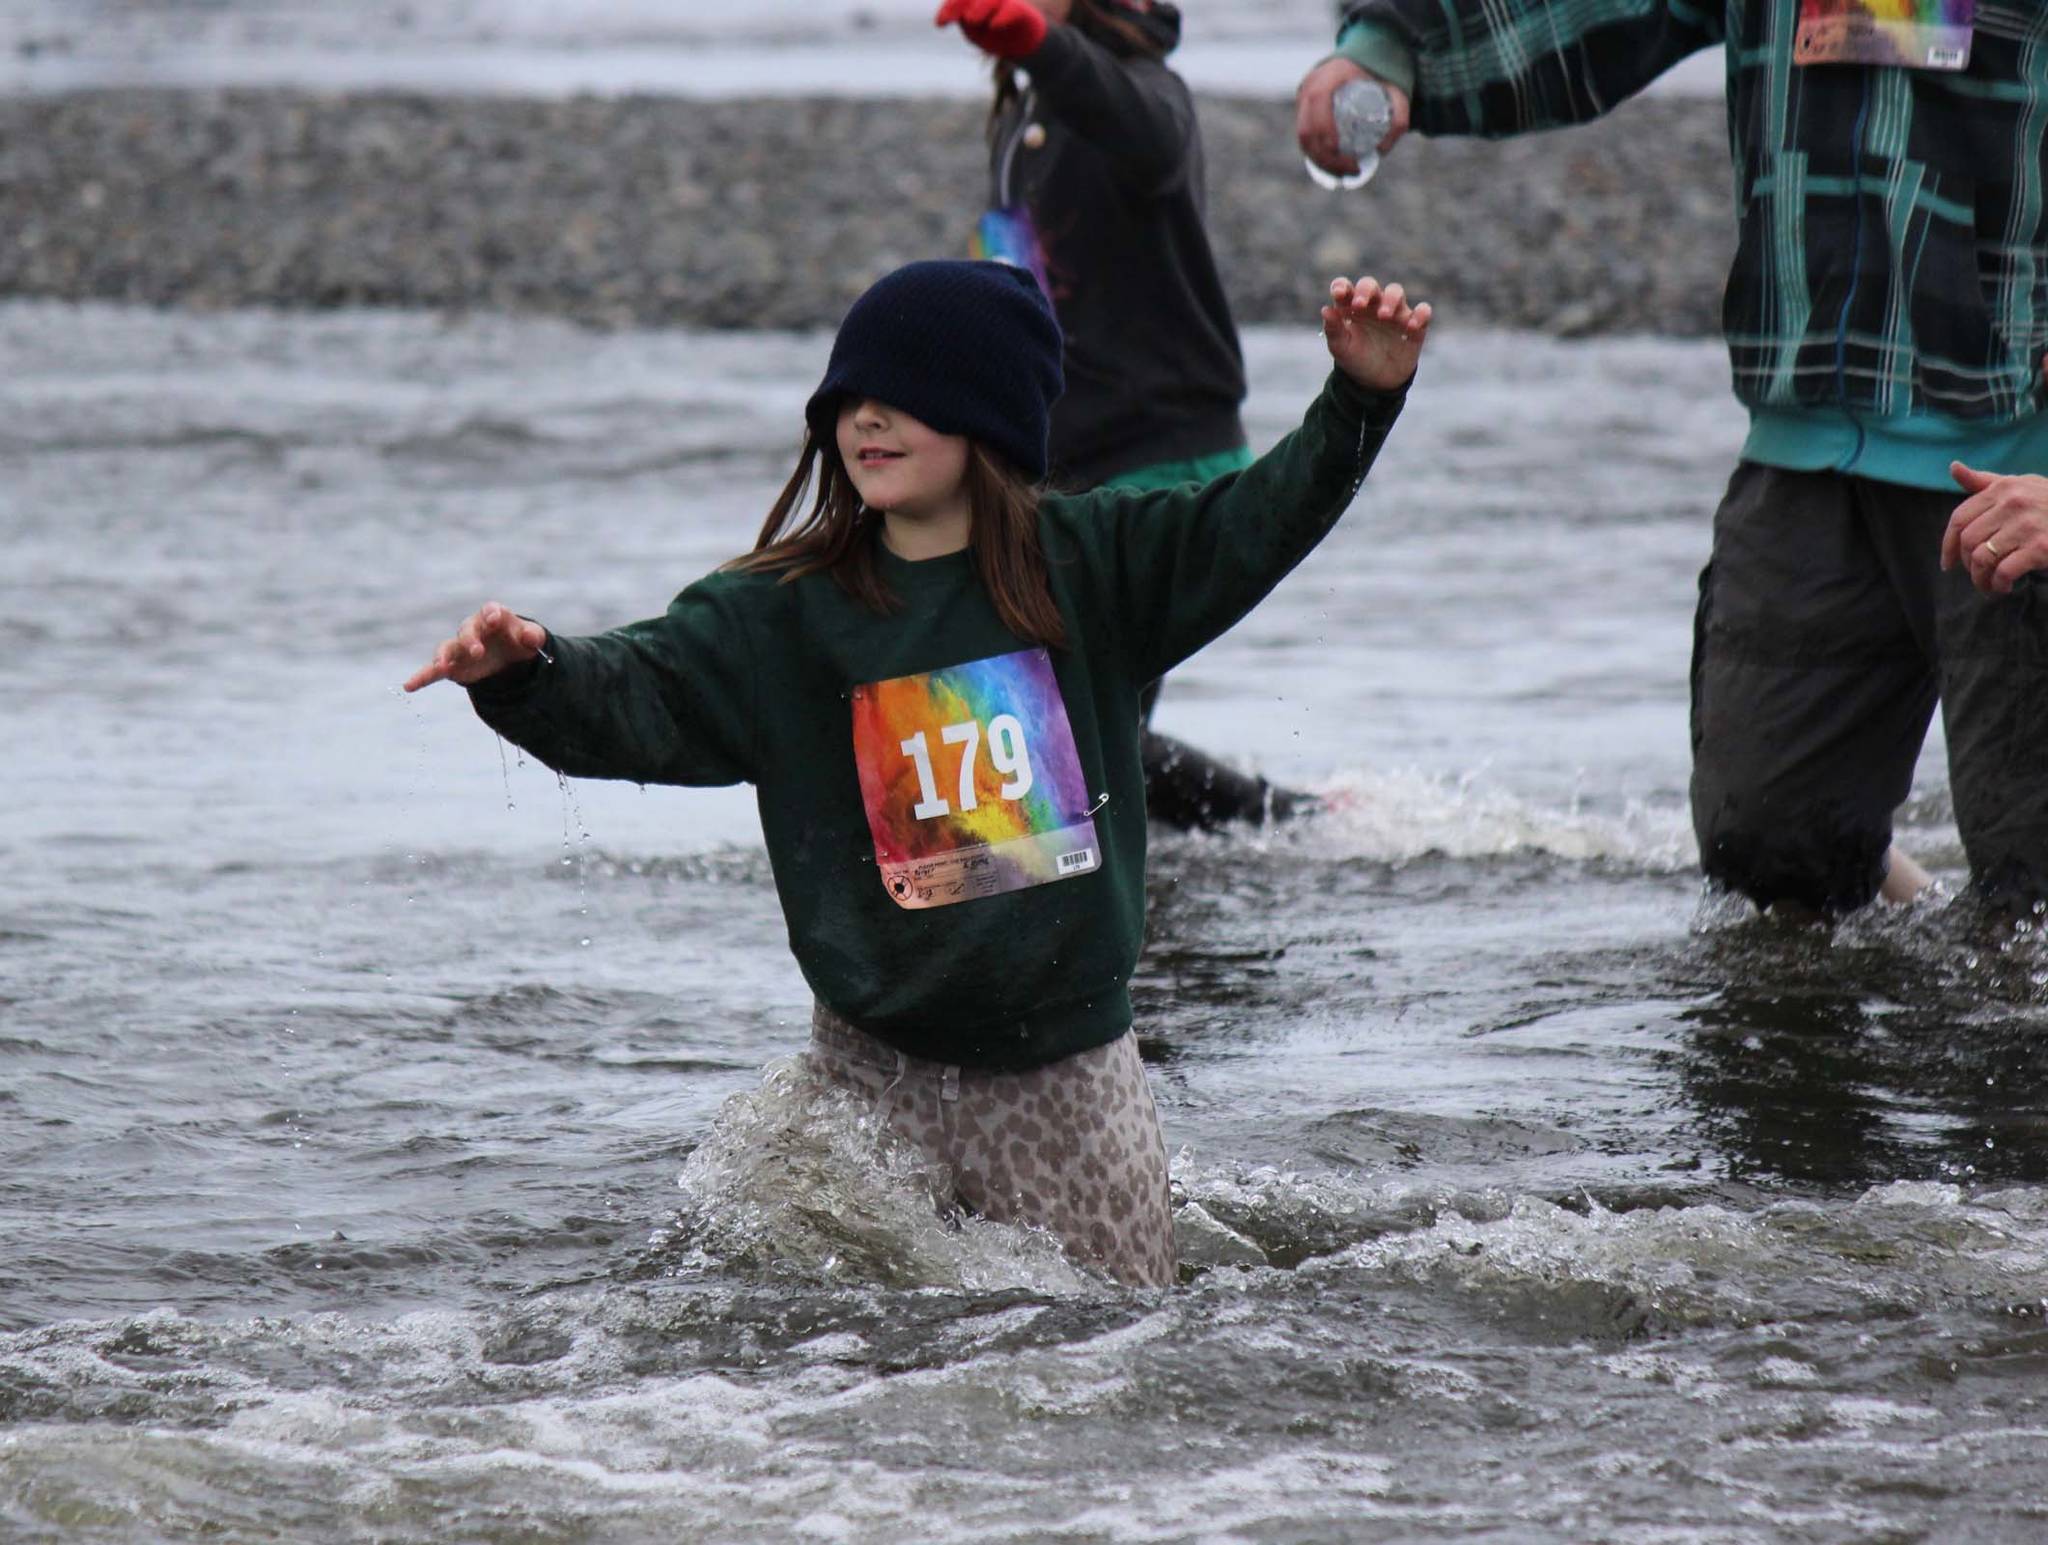 Unbothered by a drooping sweatshirt hood, Emma Berger, 179, relies on her feet to find a way across the gravel bottom of Deep Creek during the Clam Scramble held June 15, 2019 in Ninilchik, Alaska. (Photo by McKibben Jackinsky)